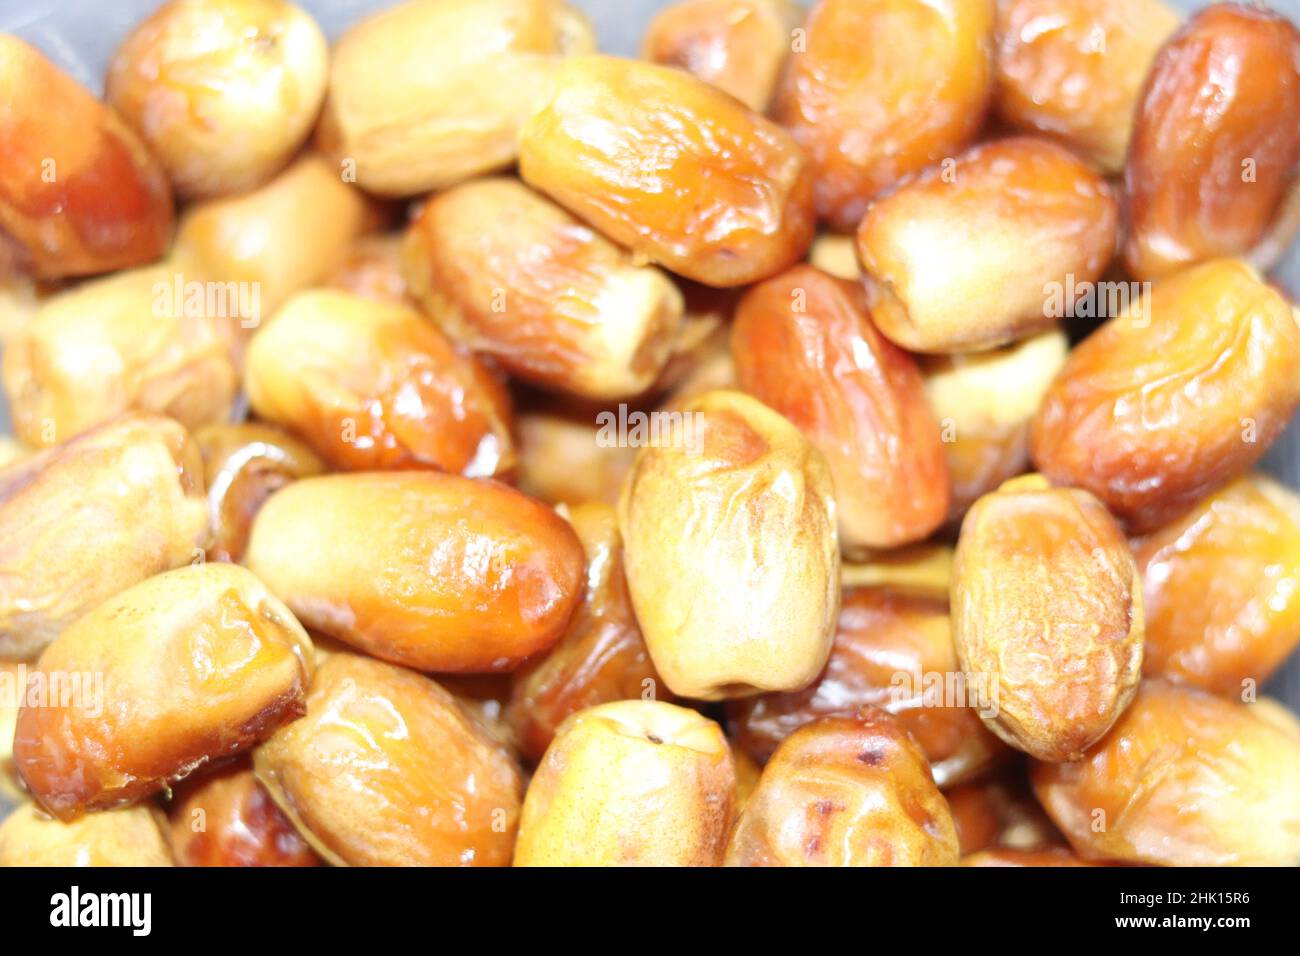 Date fruit on Alamy exclusive Stock Photo